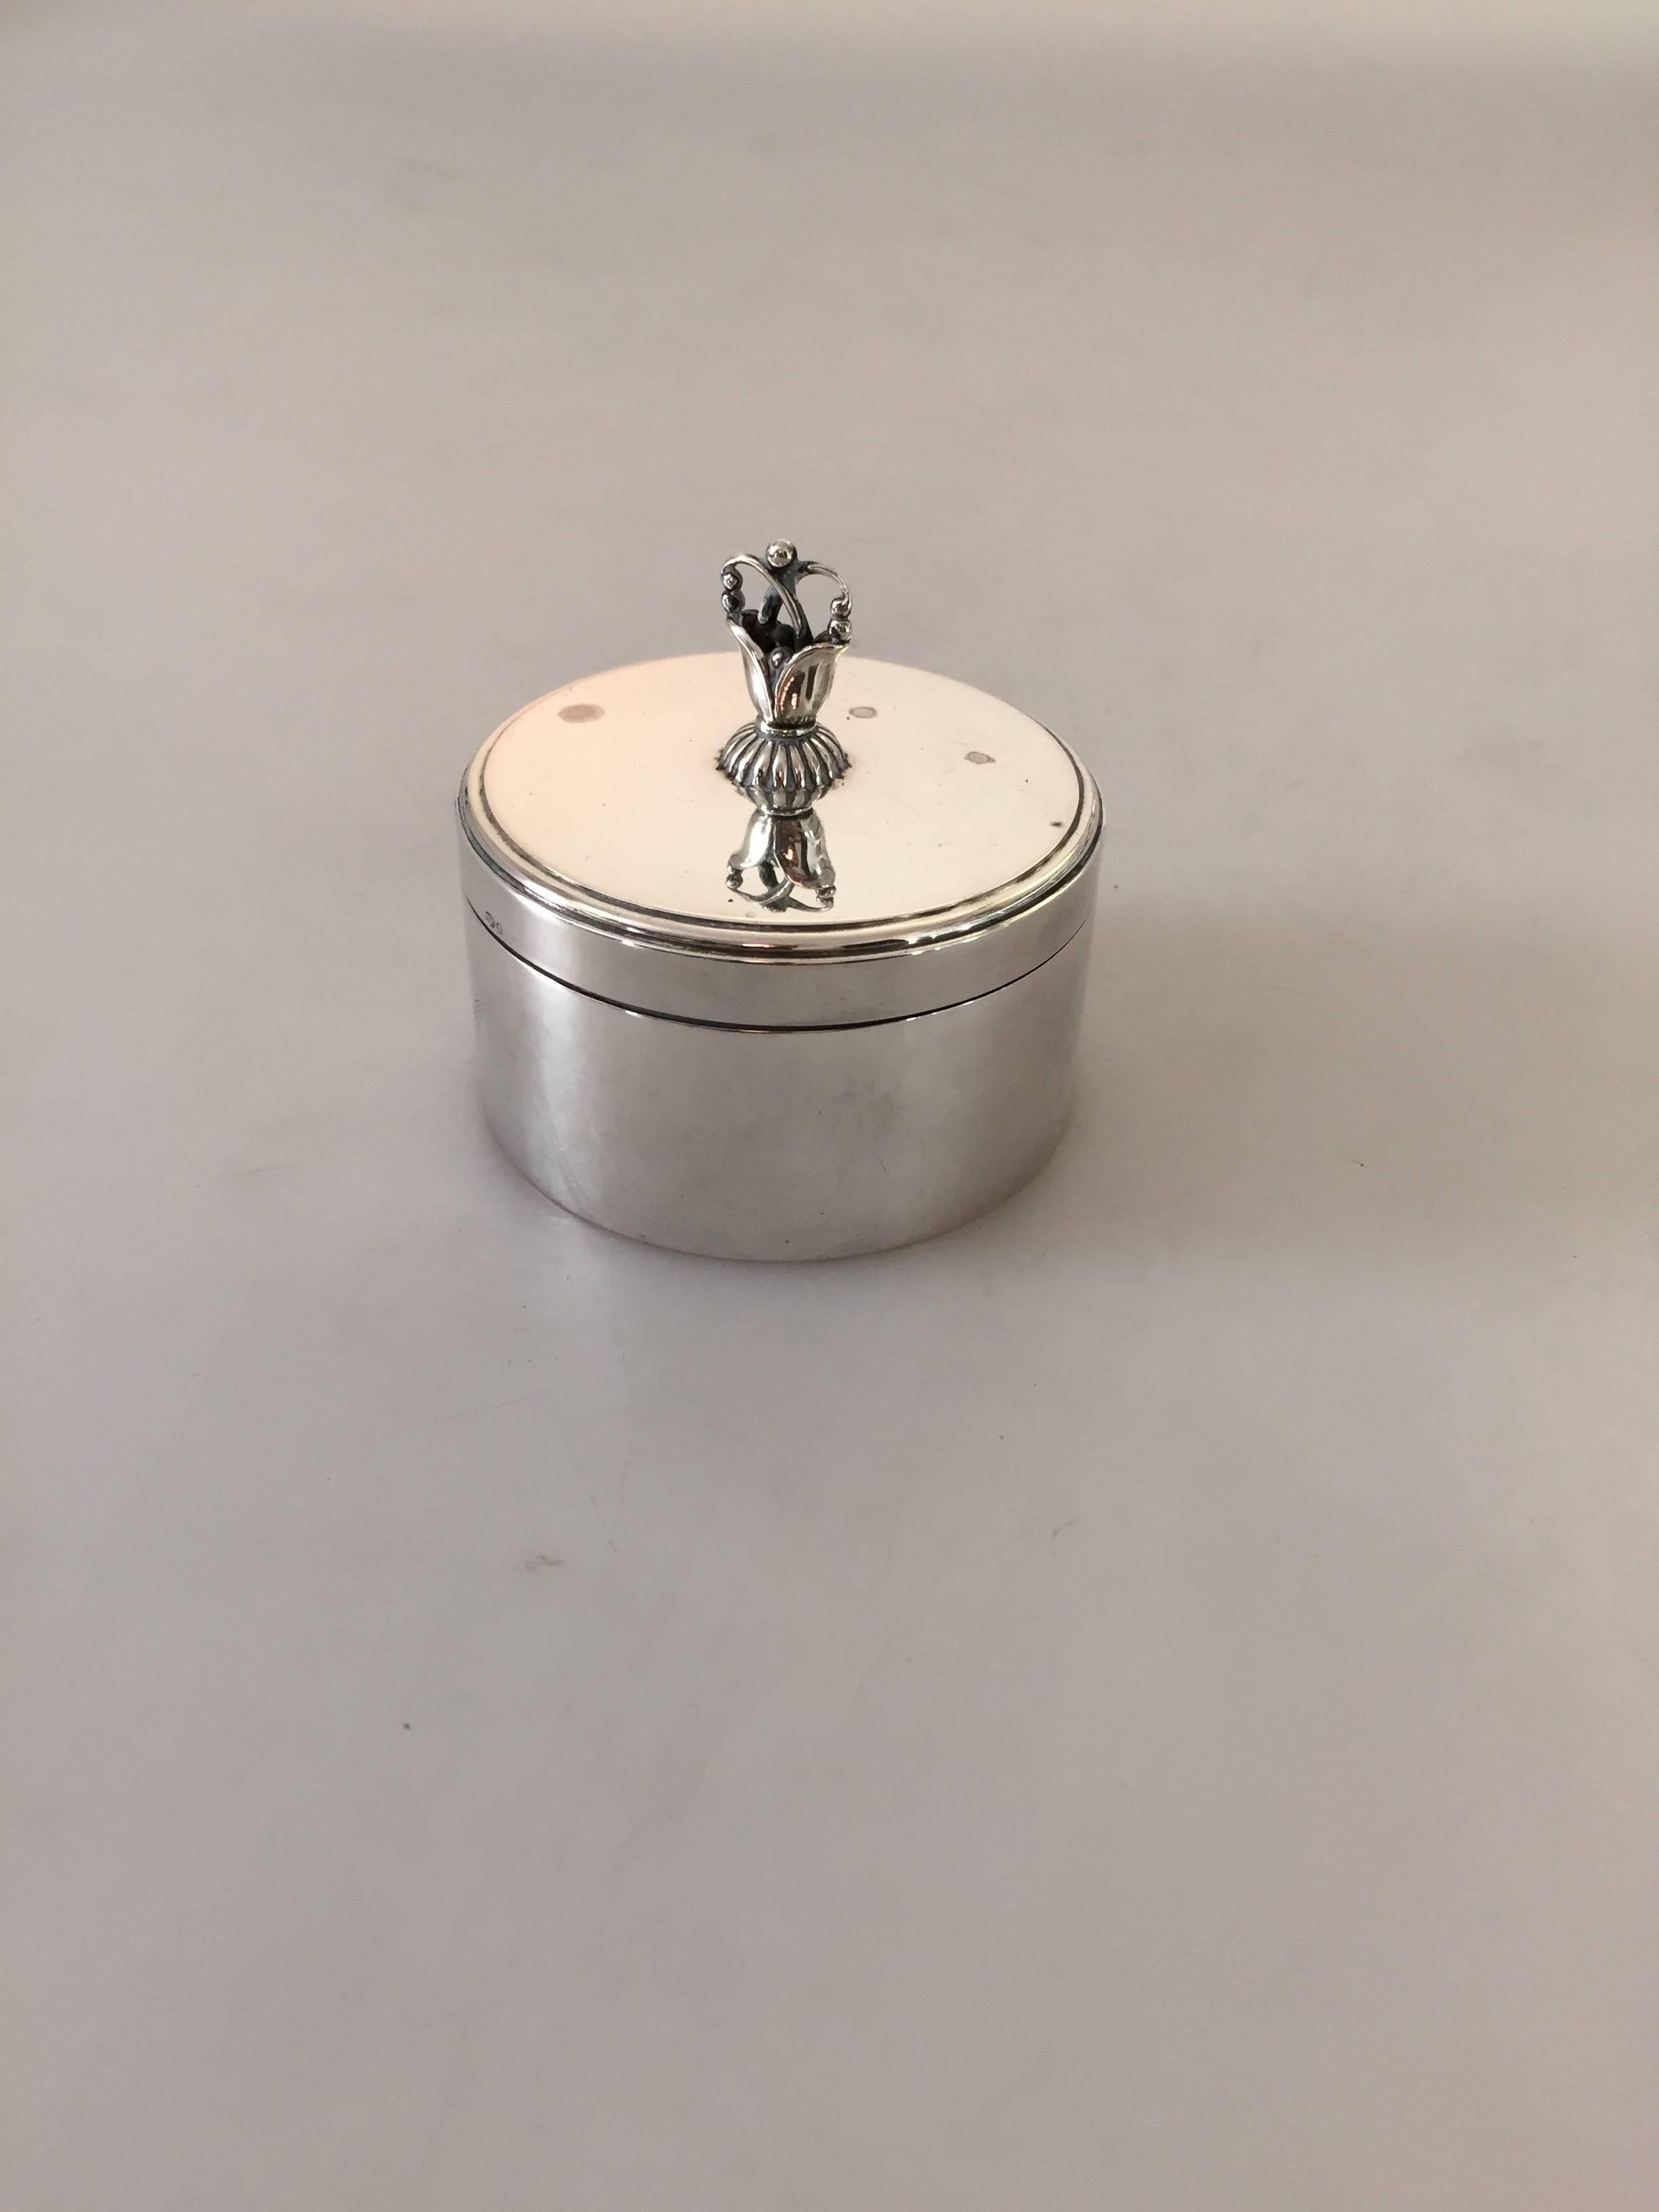 Georg Jensen sterling silver box #172K. From 1933-1944. Designed by Harald Nielsen. 

Measures: 4 cm high (1 37/64